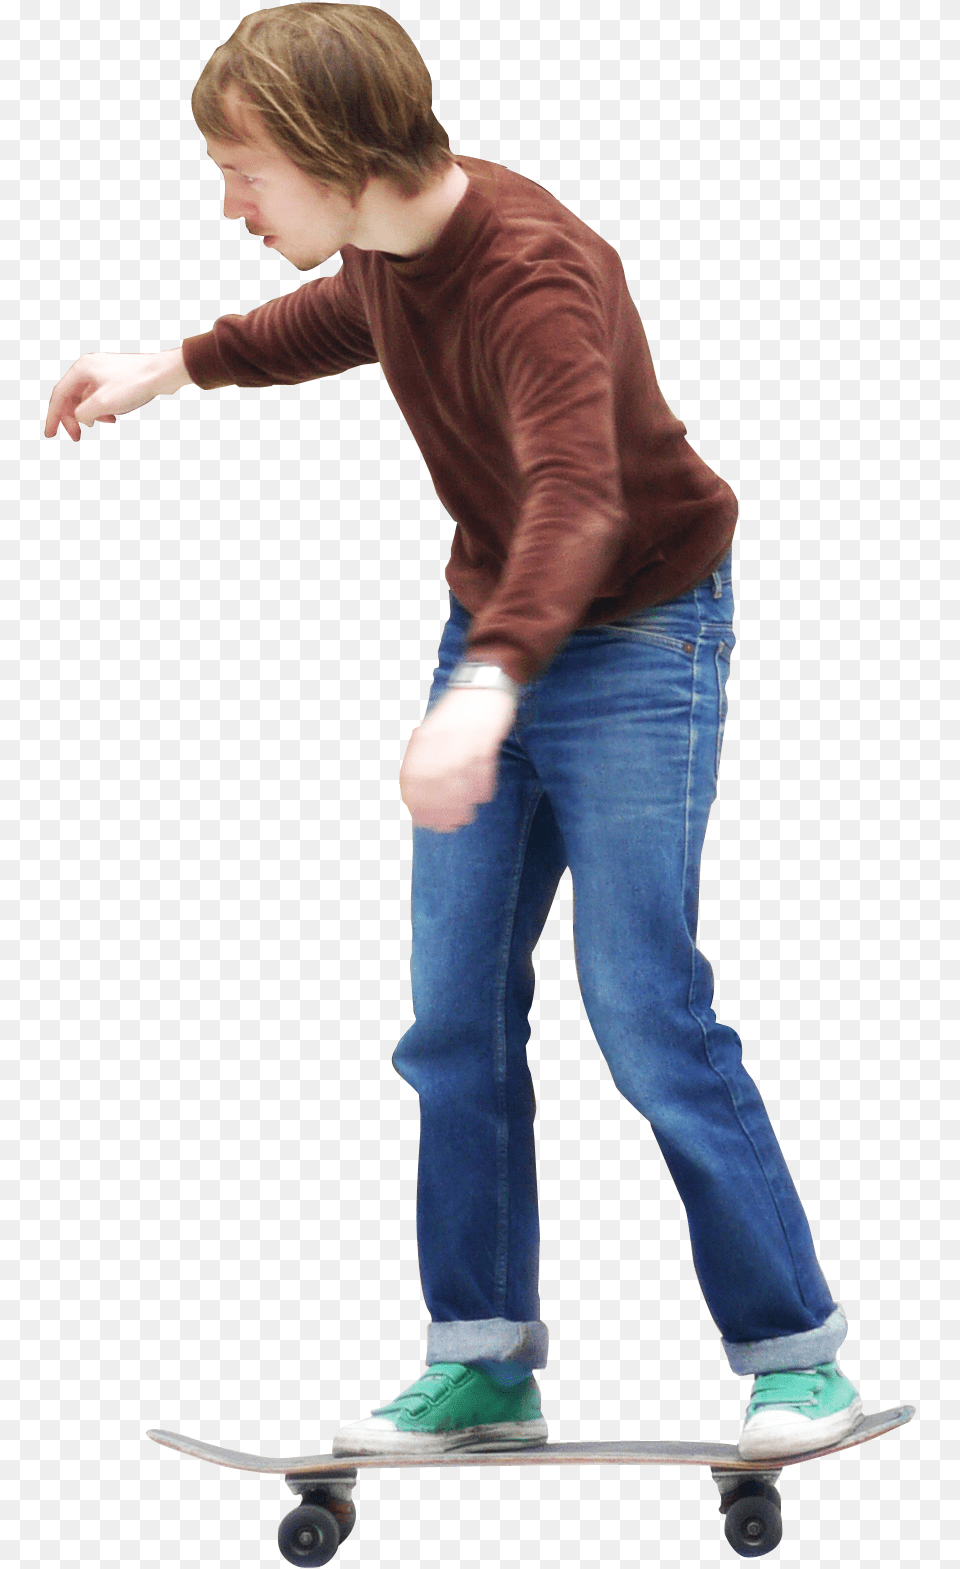 Cut Out People By Teodor Javanaud Emdn Pessoas Em Photoshop, Clothing, Jeans, Pants, Person Png Image